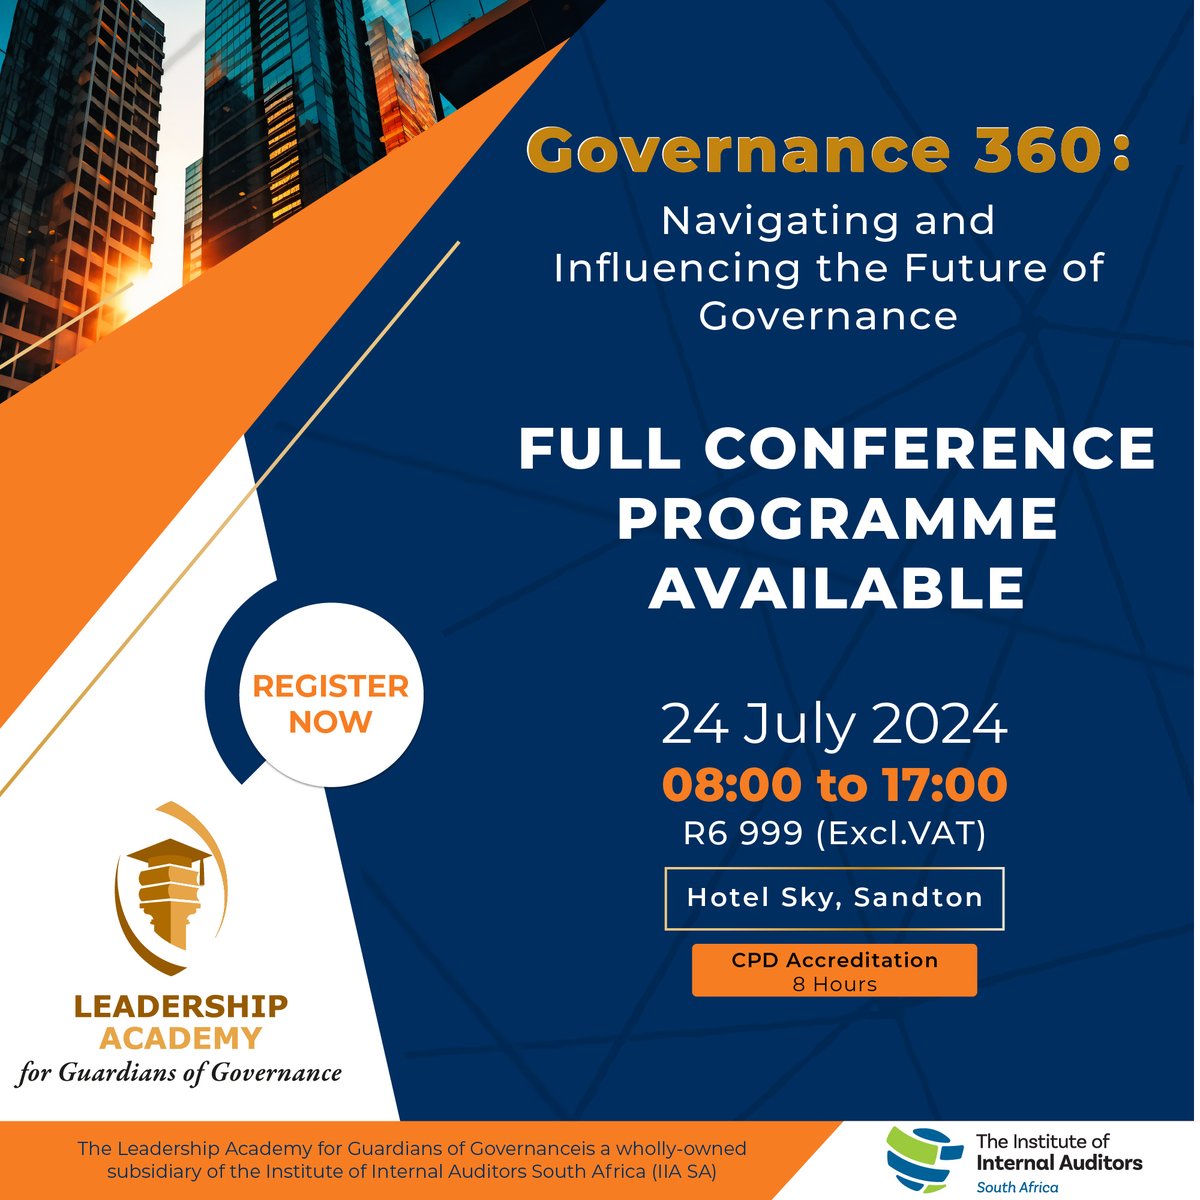 The full conference programme for the   Governance 360: Navigating and Influencing the Future of Governance   Conference is live: evolve.eventoptions.co.za/register/gover…! Register today!

#Governance360
@IIASOUTHAFRICA